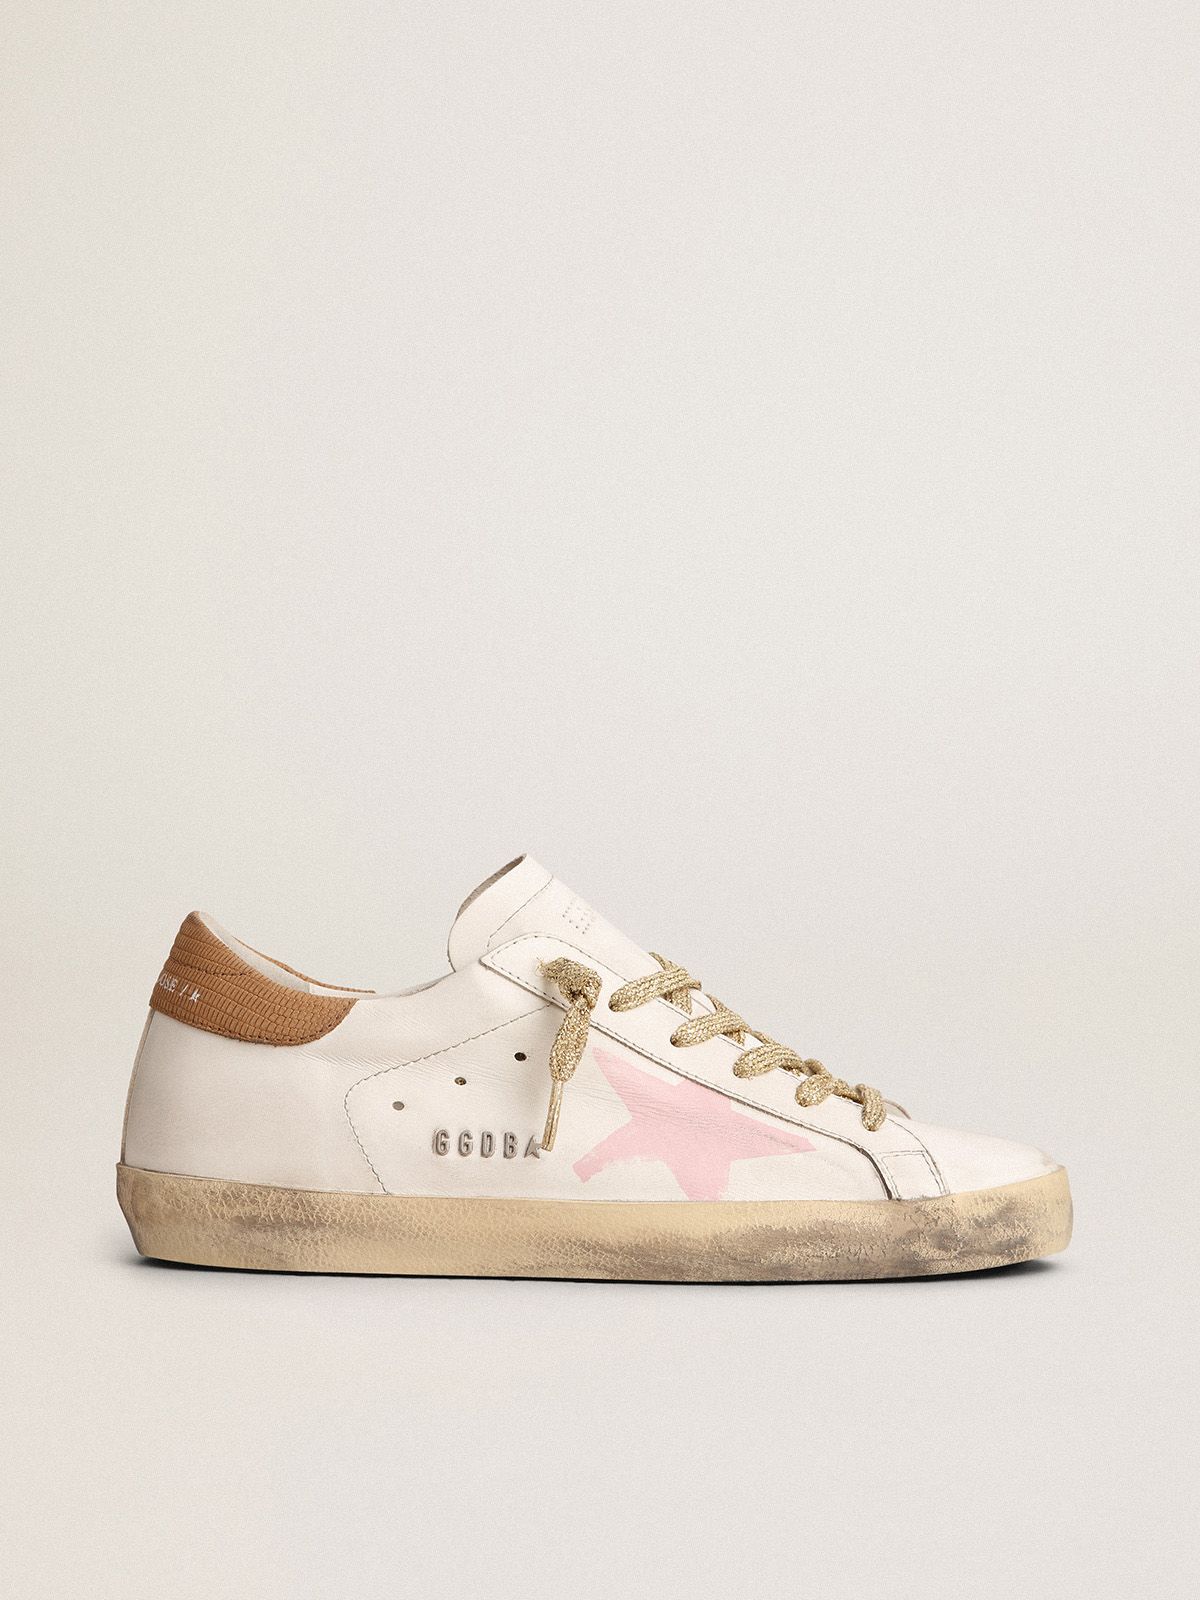 golden goose pink LTD with Super-Star leather and printed screen heel star sneakers snake-print tab